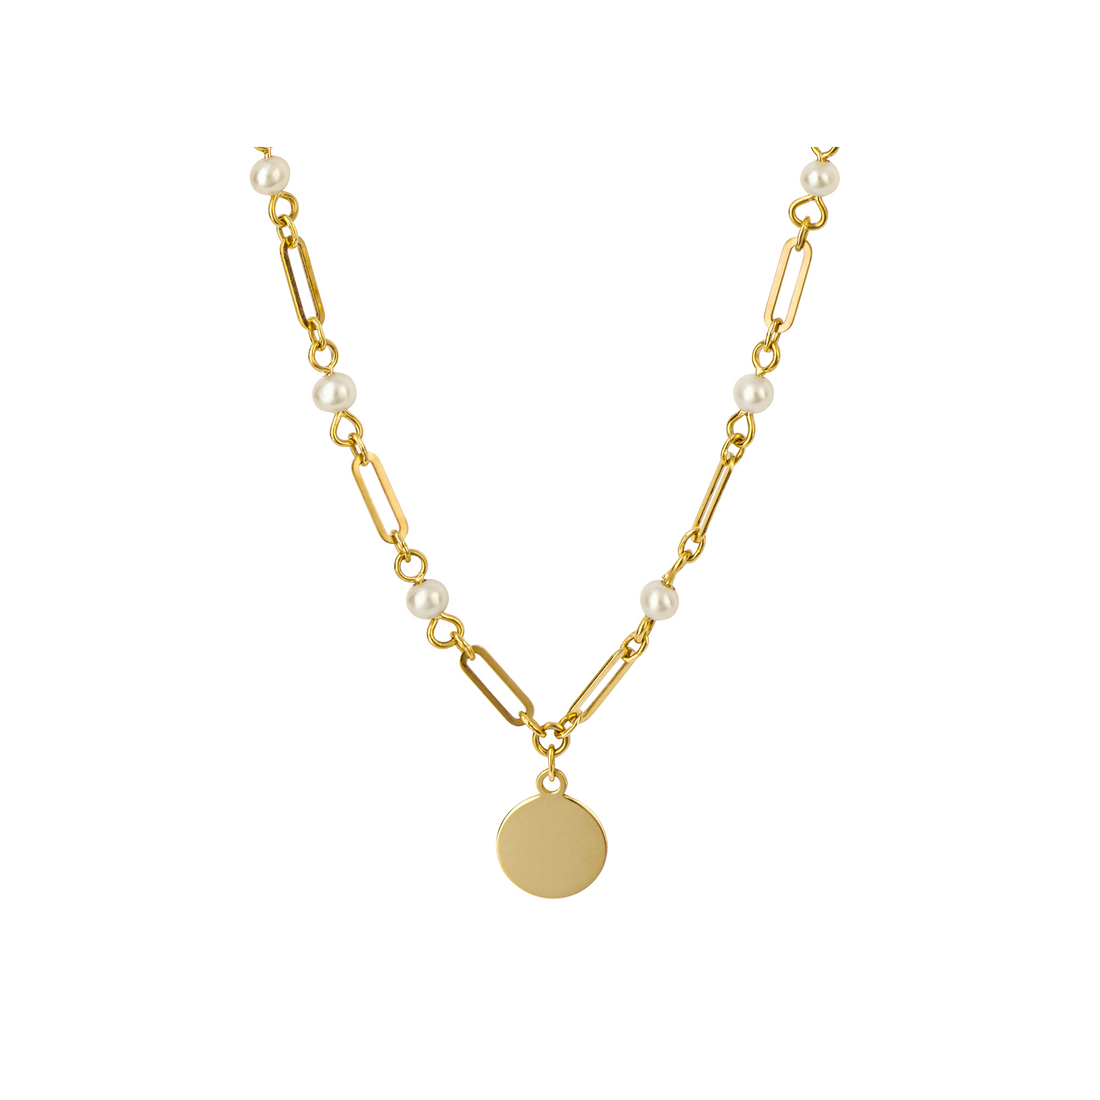 Pearl Station Necklace with Disc in 9ct Yellow Gold - Robert Anthony Jewellers, Edinburgh